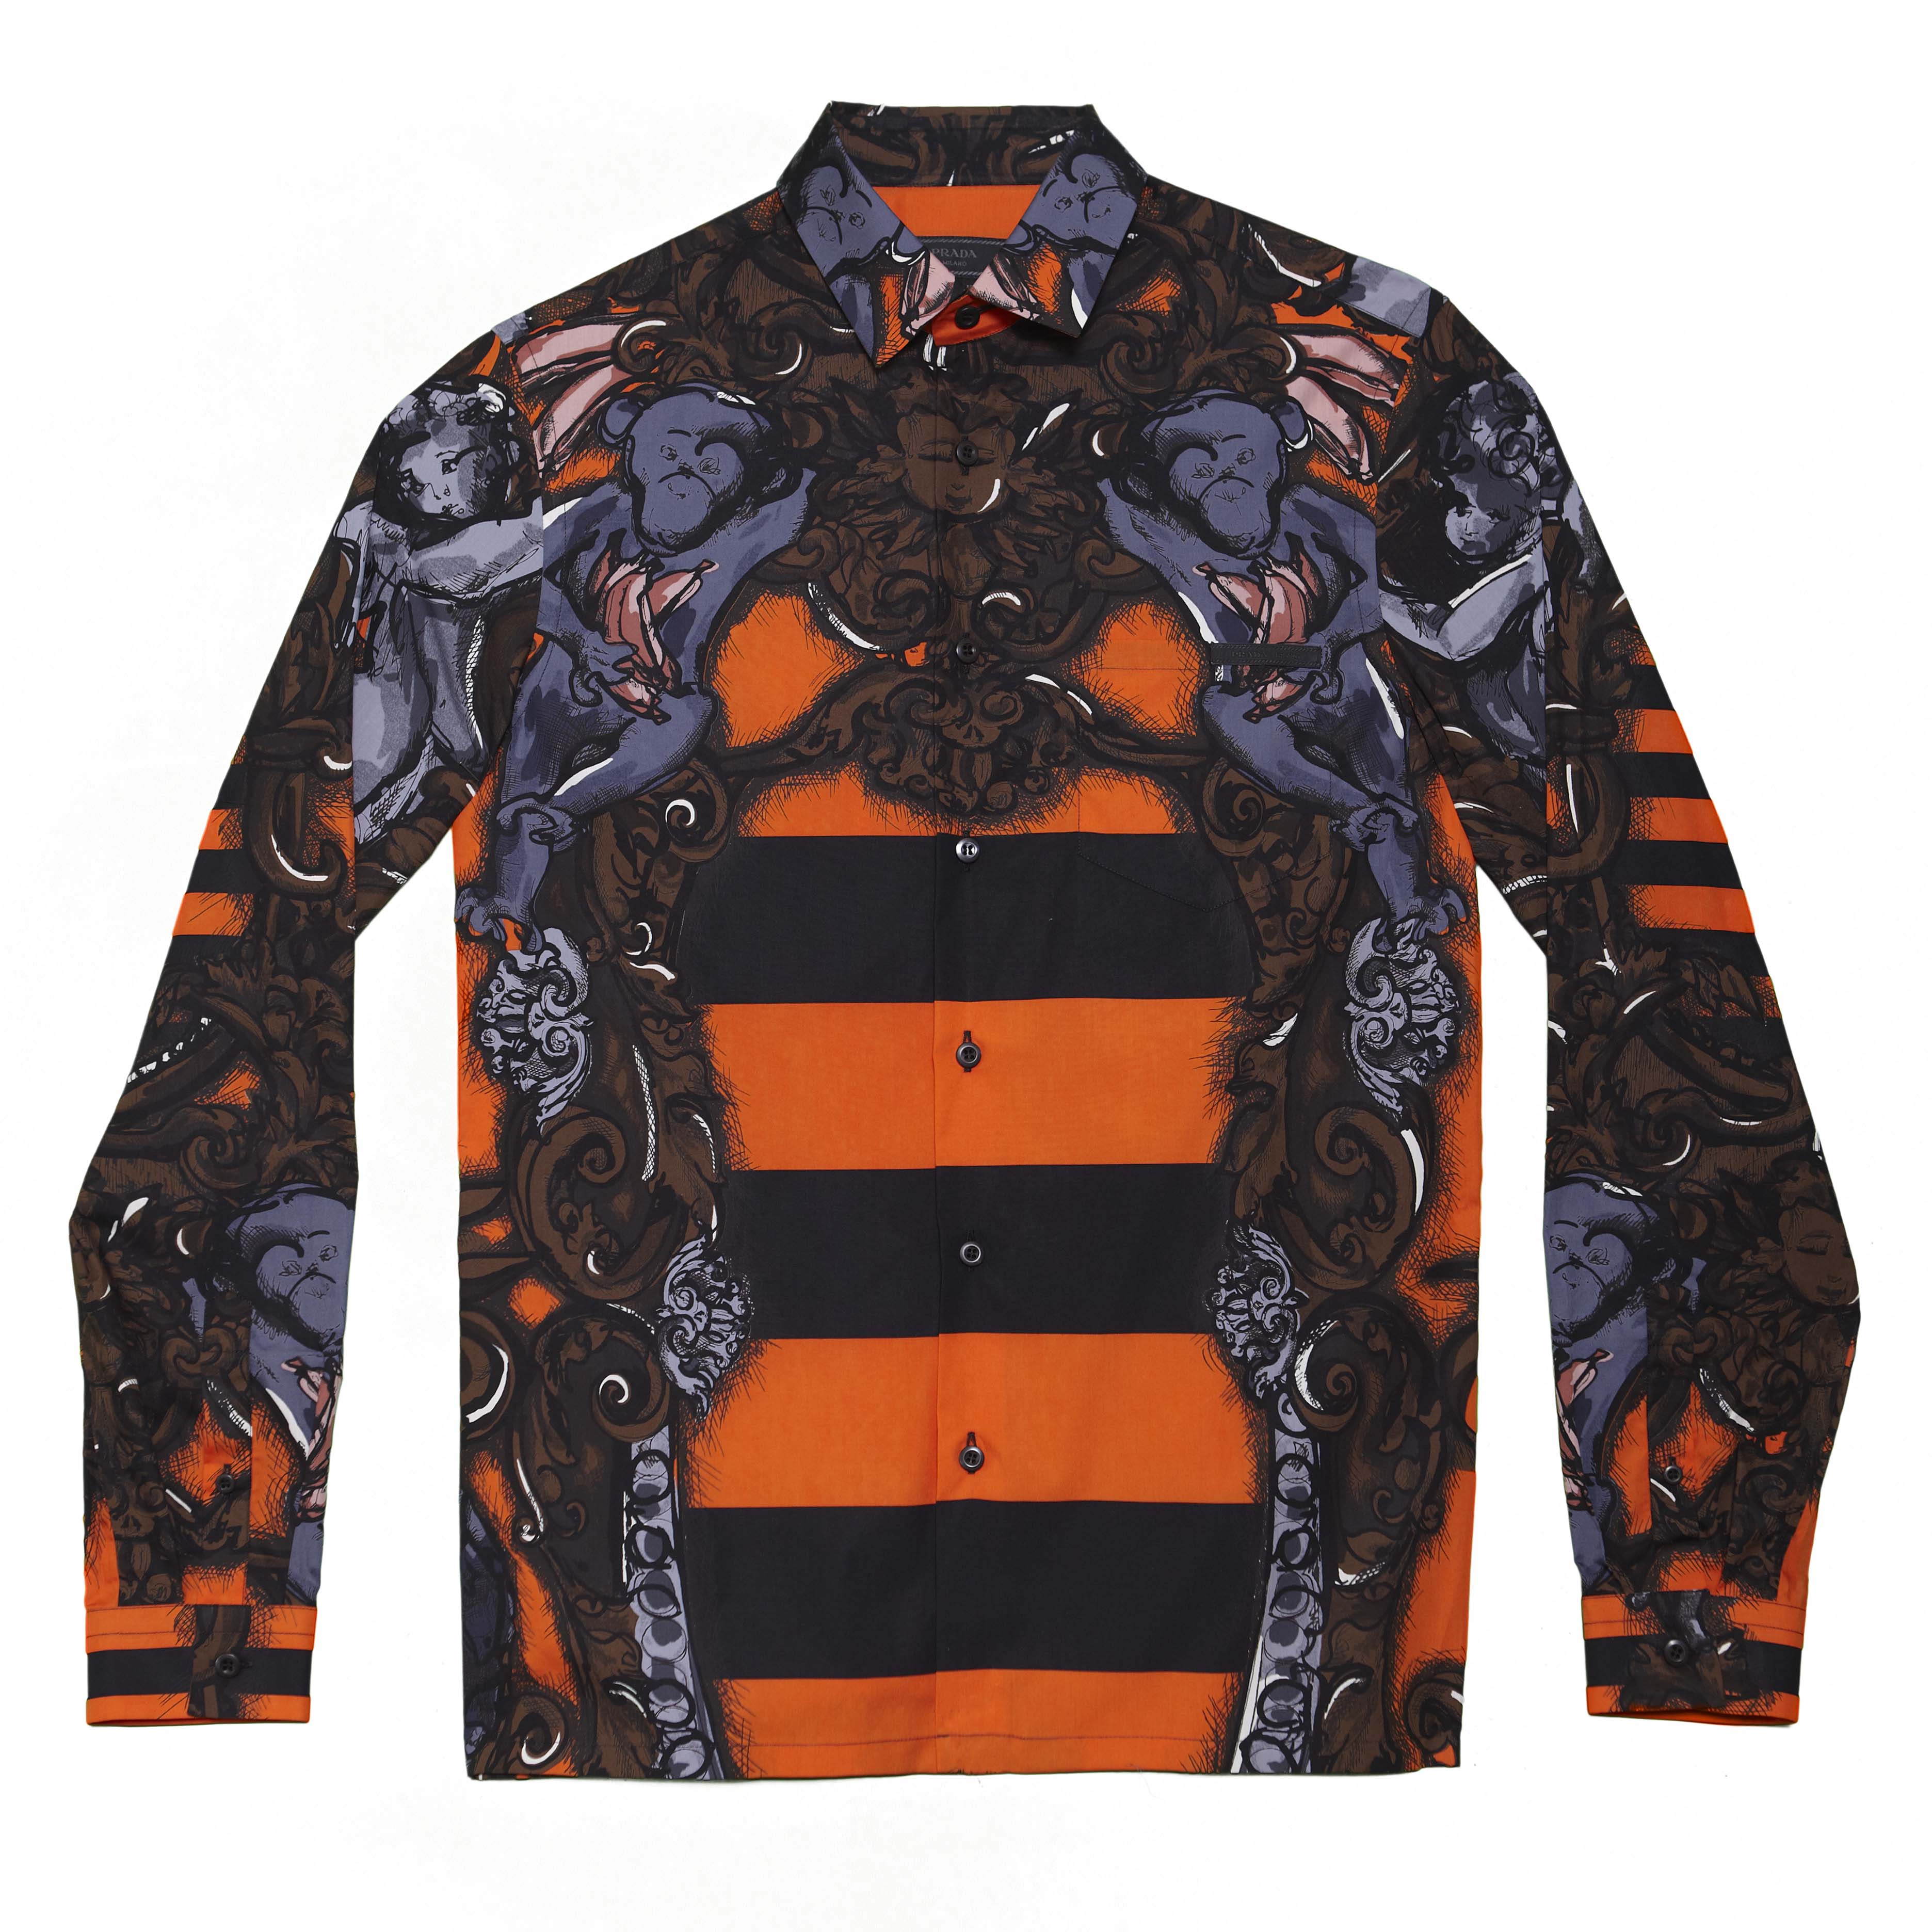 Prada Designs Shirts Exclusively for Dover Street Market NYC | Complex